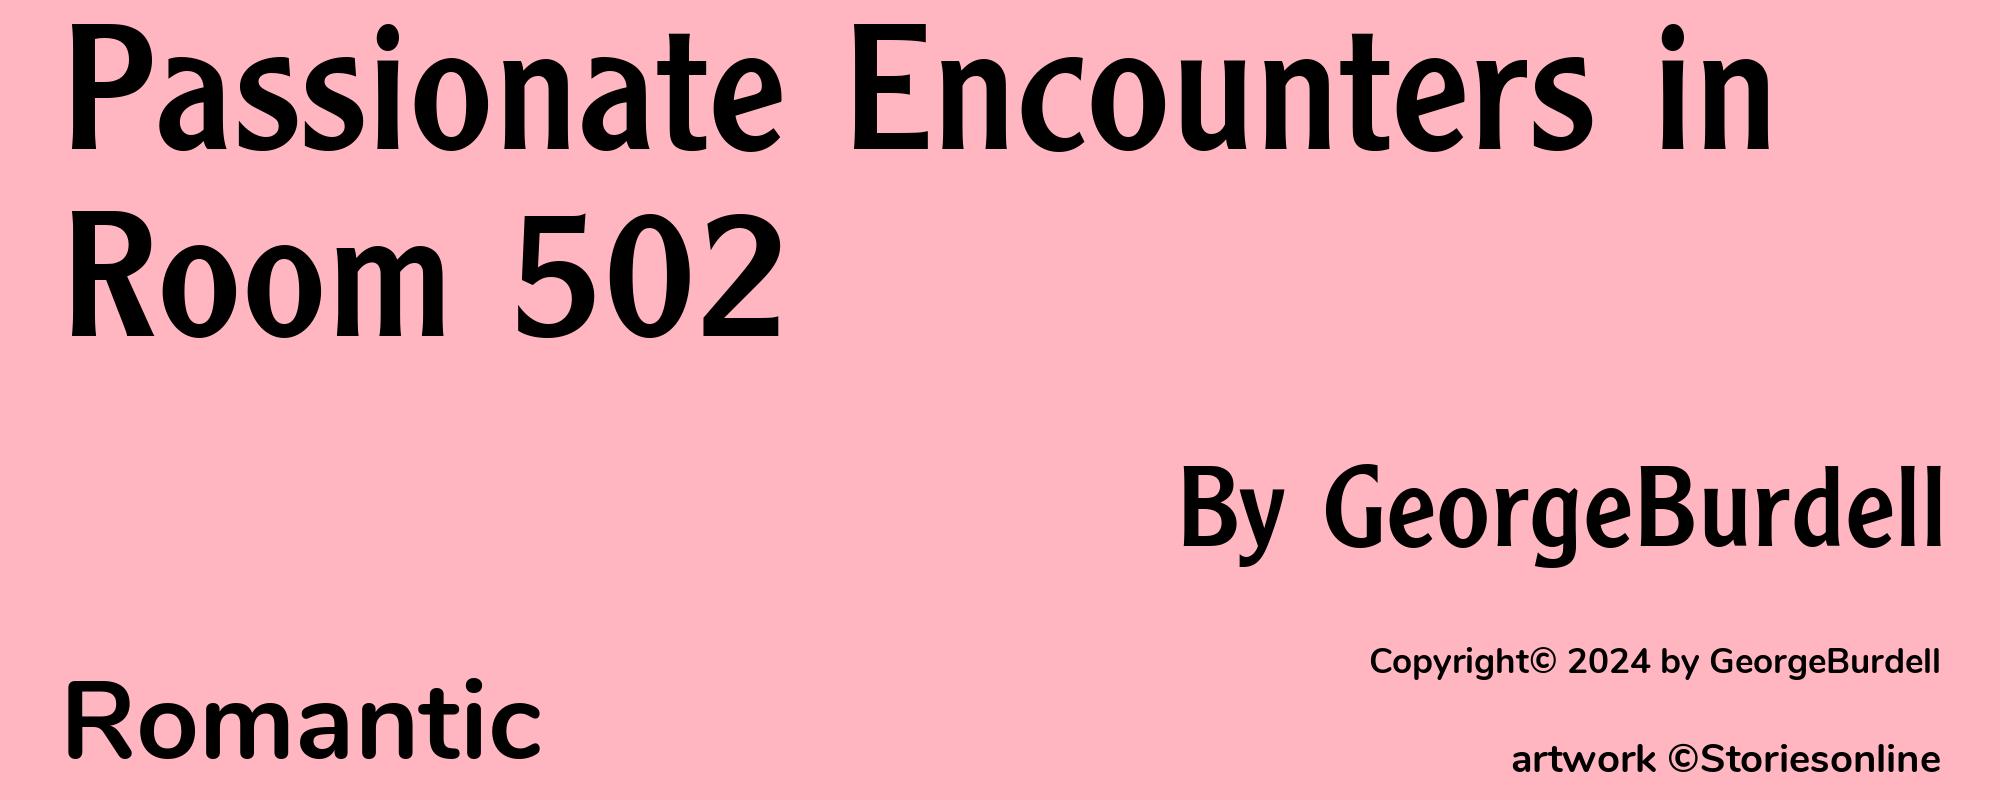 Passionate Encounters in Room 502 - Cover